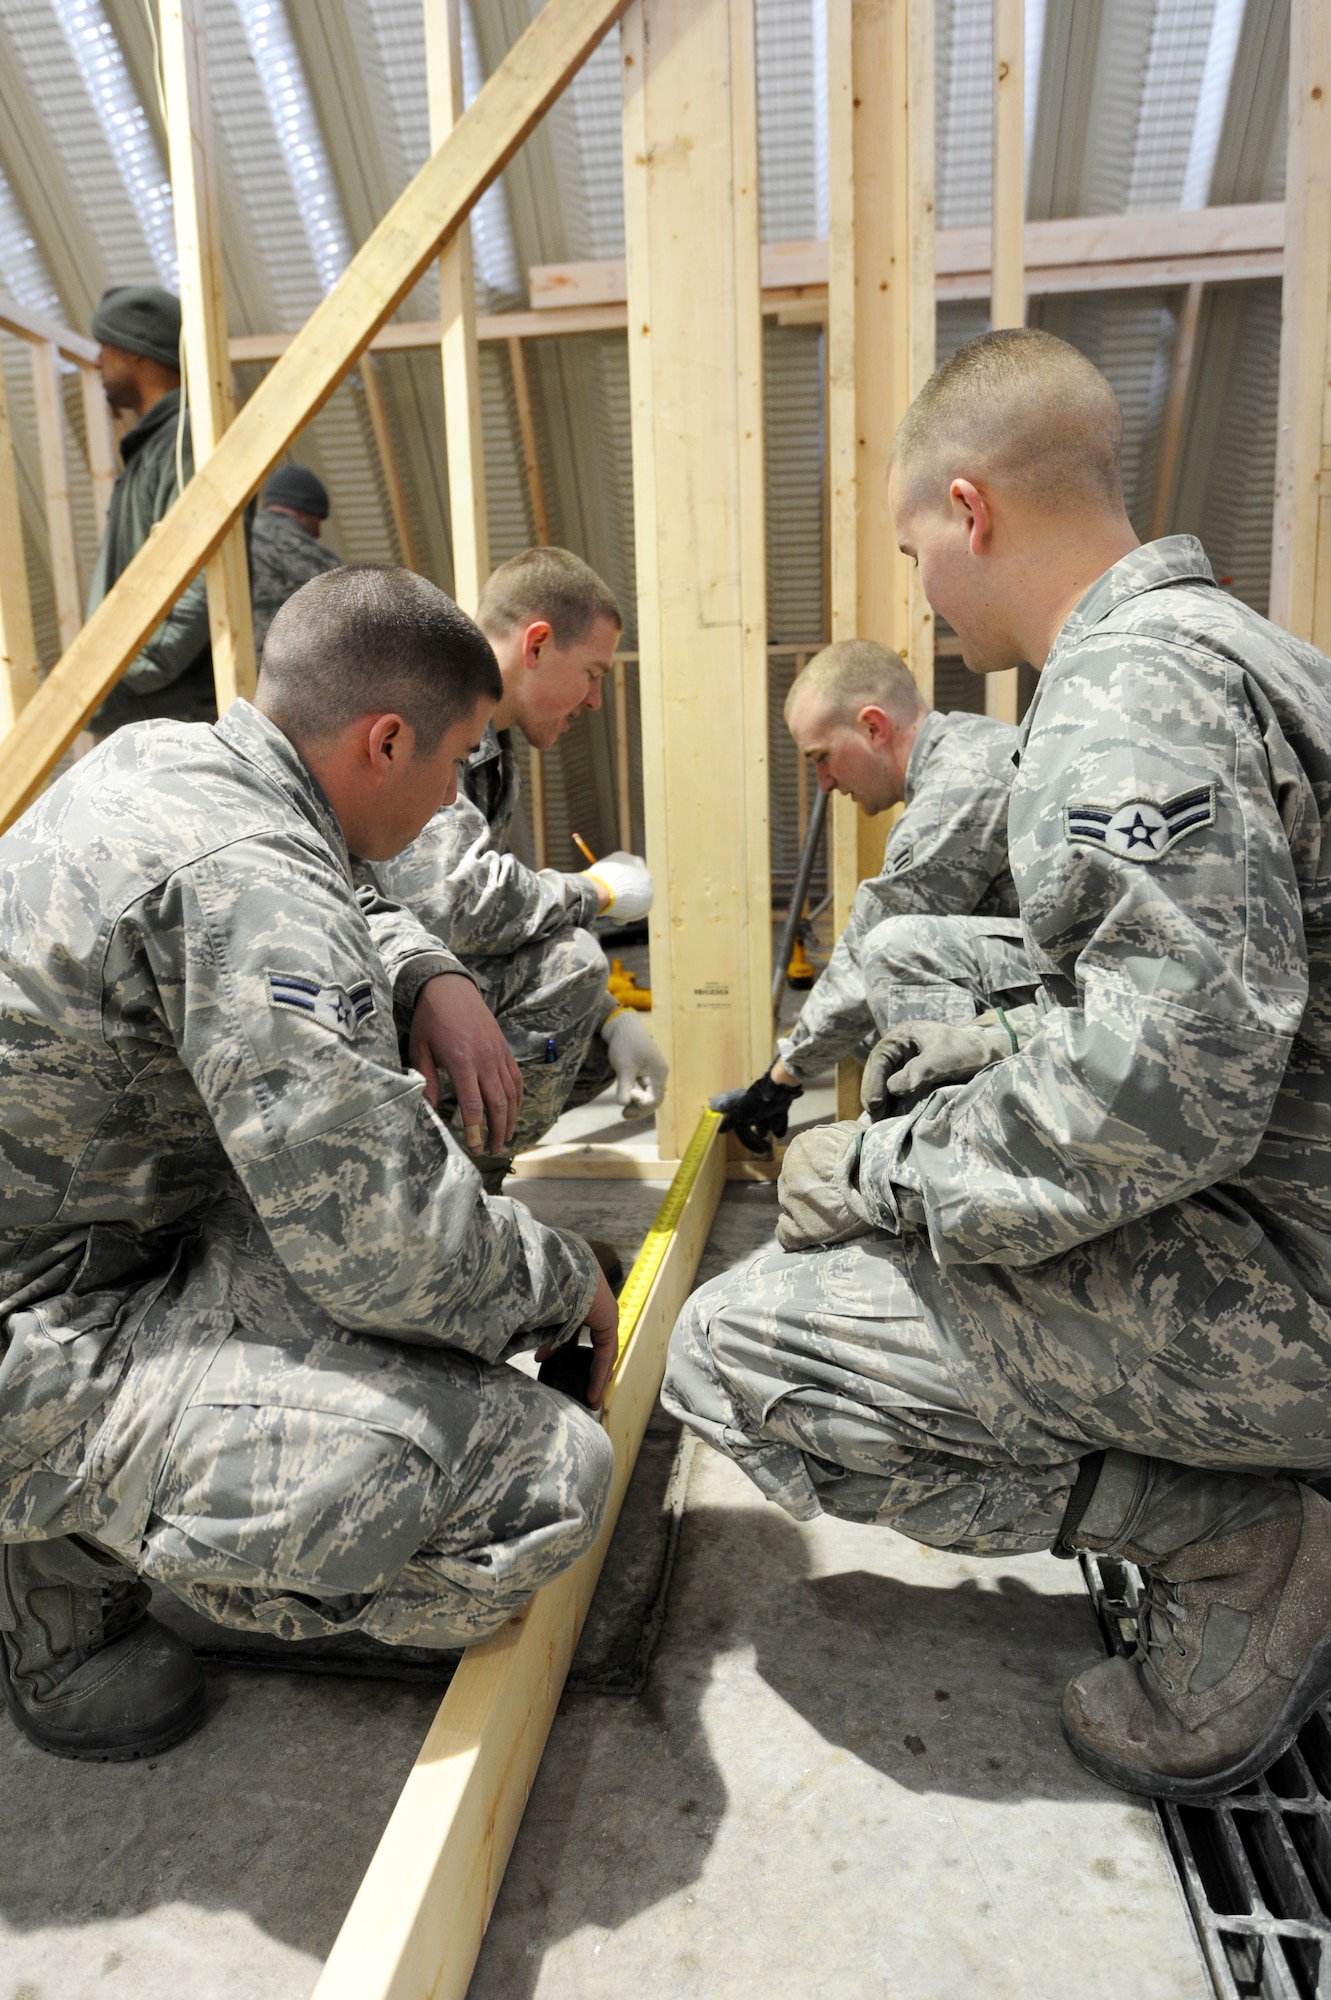 MISAWA AIR BASE, Japan -- From left, Airmen 1st Class Allen Broome, Derek Wagner, Evan Gustafson, and Cameron Holder, 35th Civil Engineer Squadron structural apprentices, measure lumber in Building 1366 here, Feb. 8. CES Airmen have been renovating the building, which will be the new location for a stray animal temporary care facility that will be operated by PAWS. PAWS has been operating within the Misawa community since the 1980's with the primary purpose of sheltering stray animals found on base. (U.S. Air Force photo/Airman 1st Class Kia Atkins)